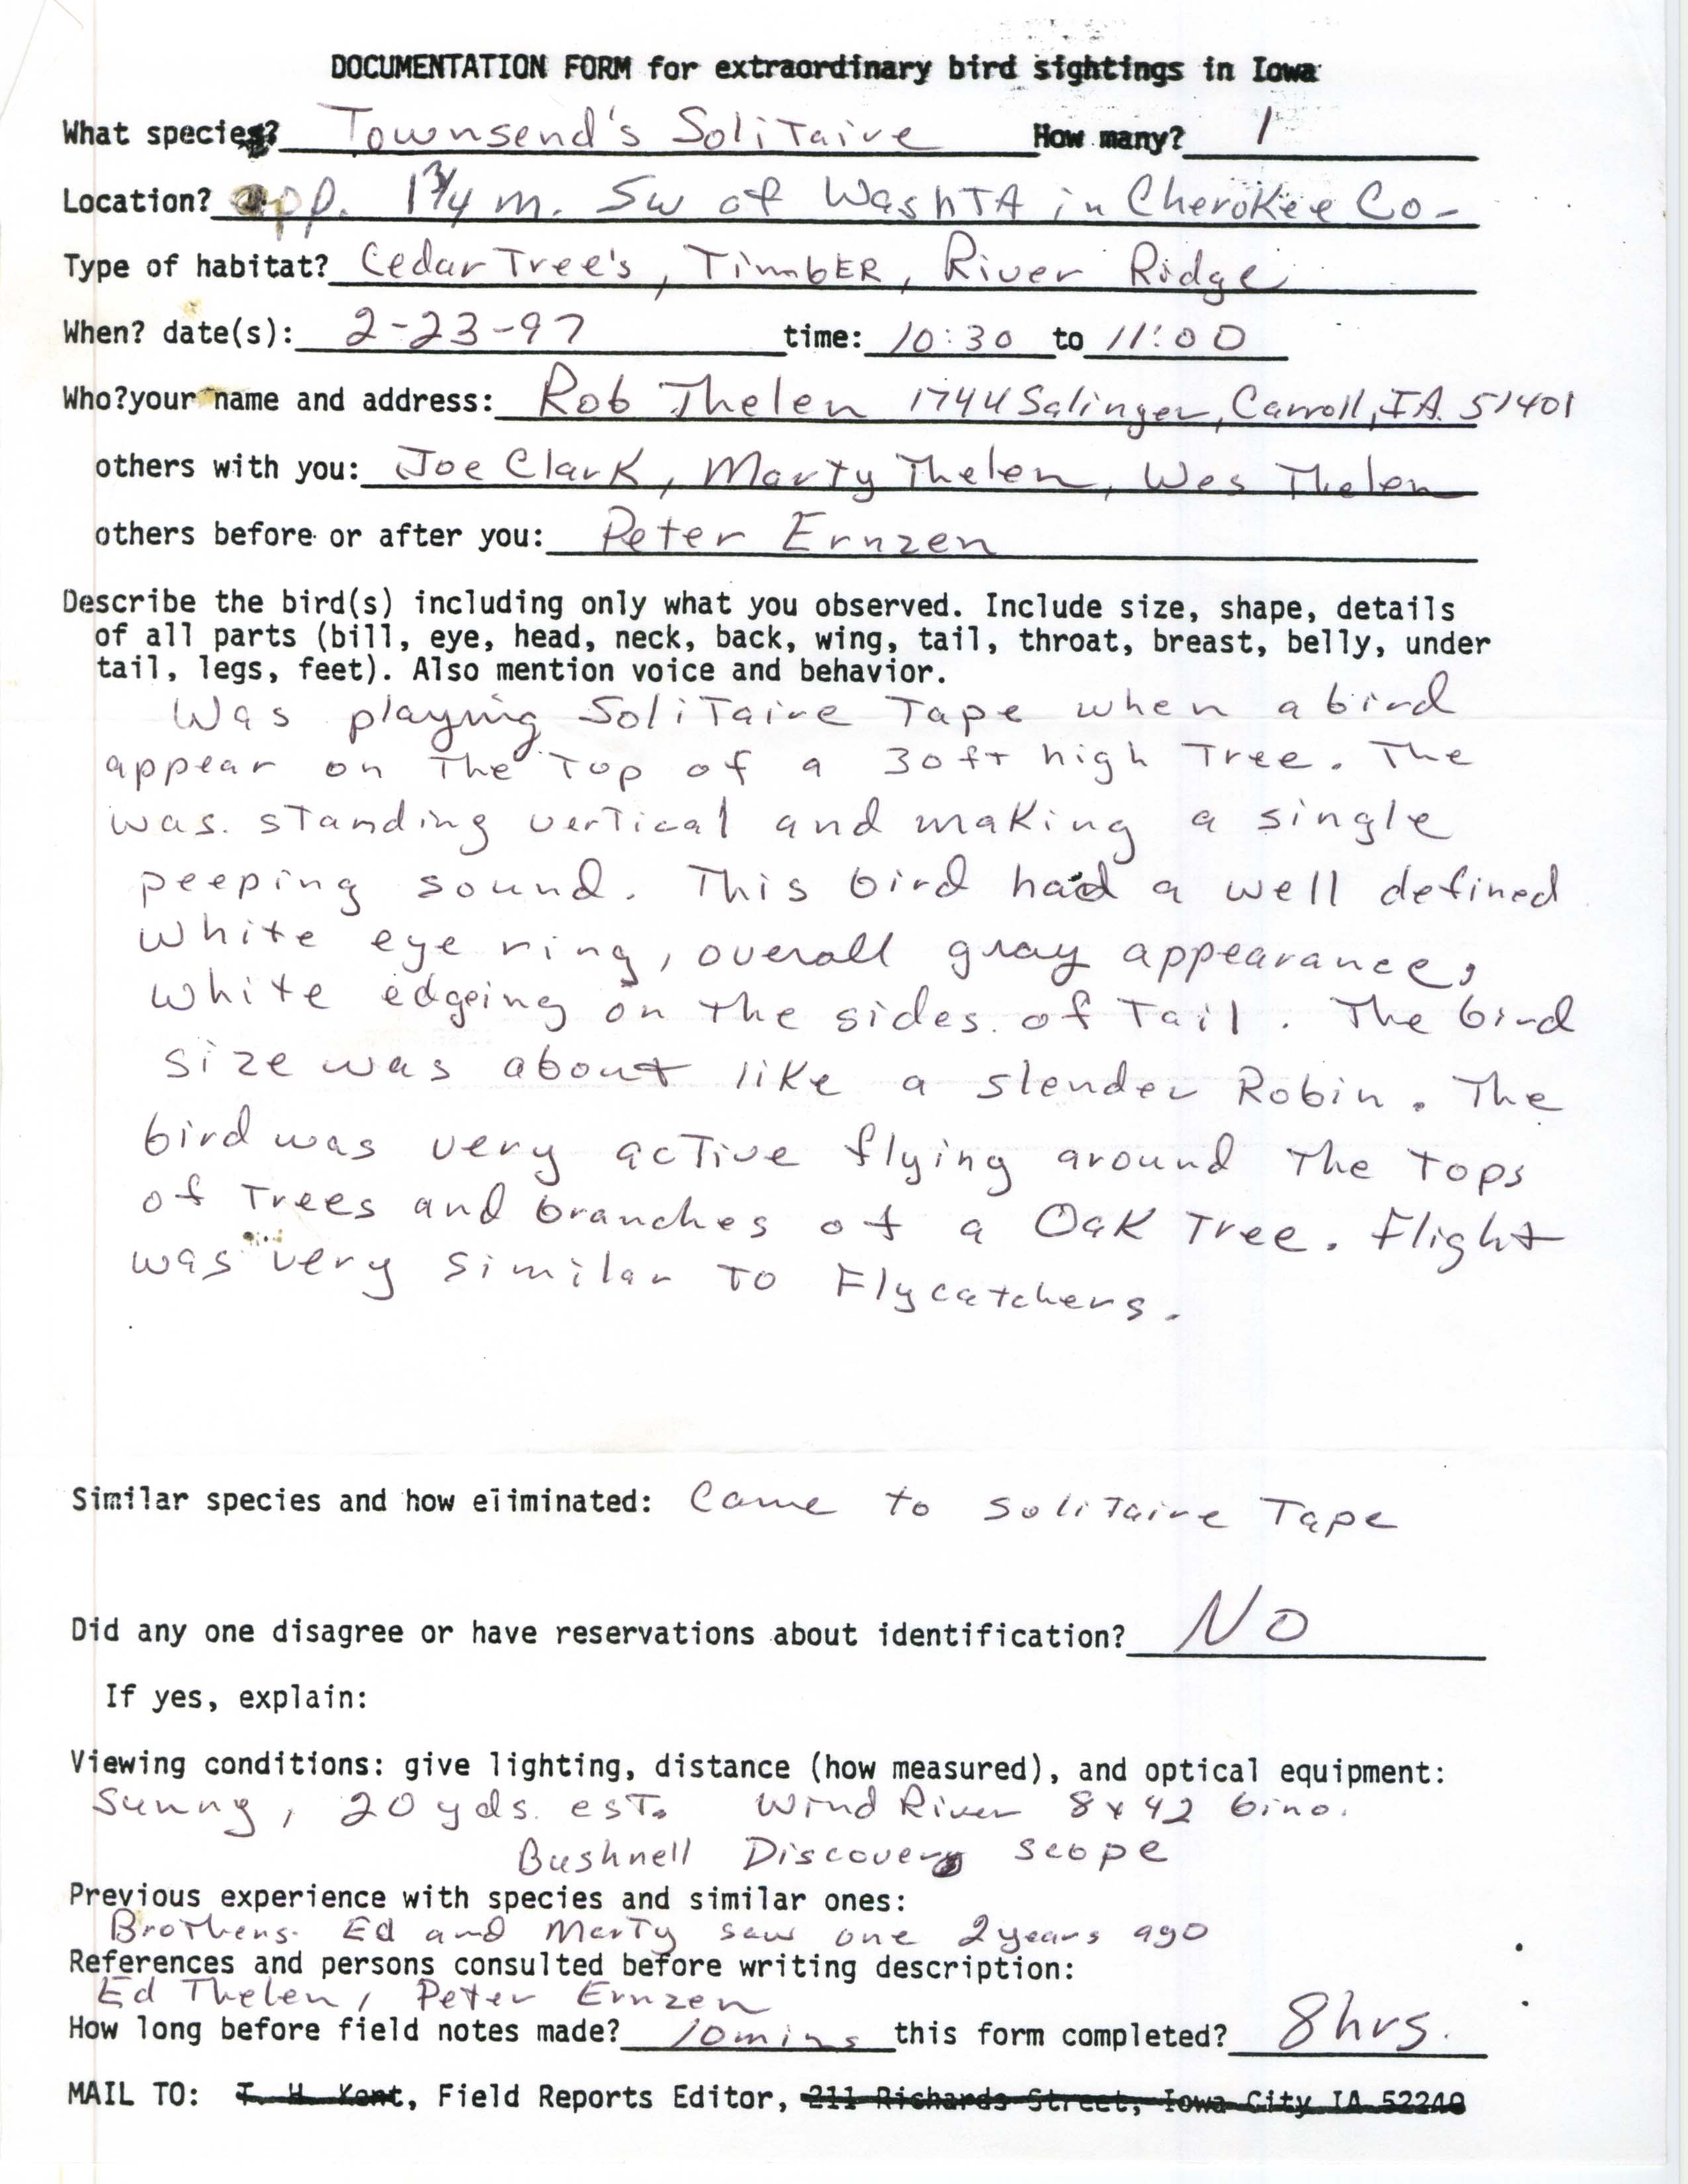 Rare bird documentation form for Townsend's Solitaire southwest of Washta, 1997